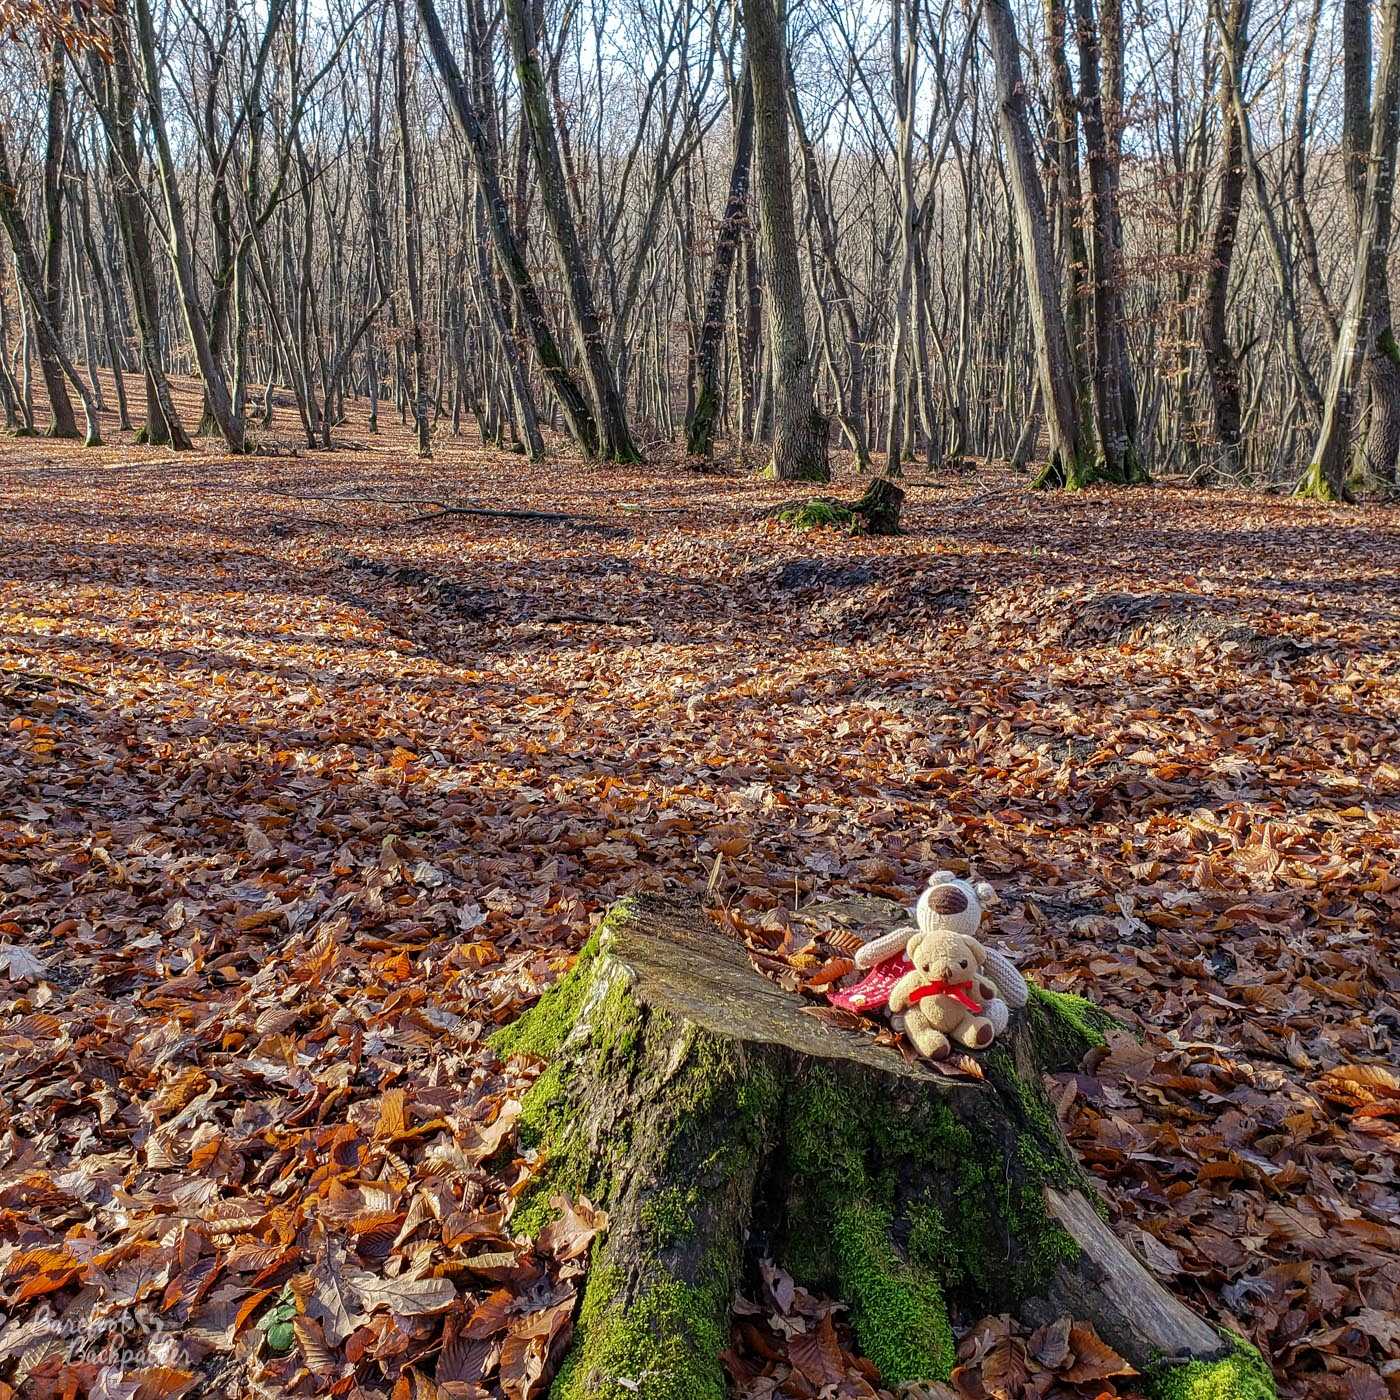 In the background are the trunks of a lot of trees. Much of the picture tho is taken in a slight clearing. The ground is covered with fallen leaves, crisp and golden, reflecting the sunlight. In the foreground is a tree trunk, cut quite low. On the tree trunk are two soft toys, a small bear called Baby Ian, and behind him, a slightly larger dog called Dave.